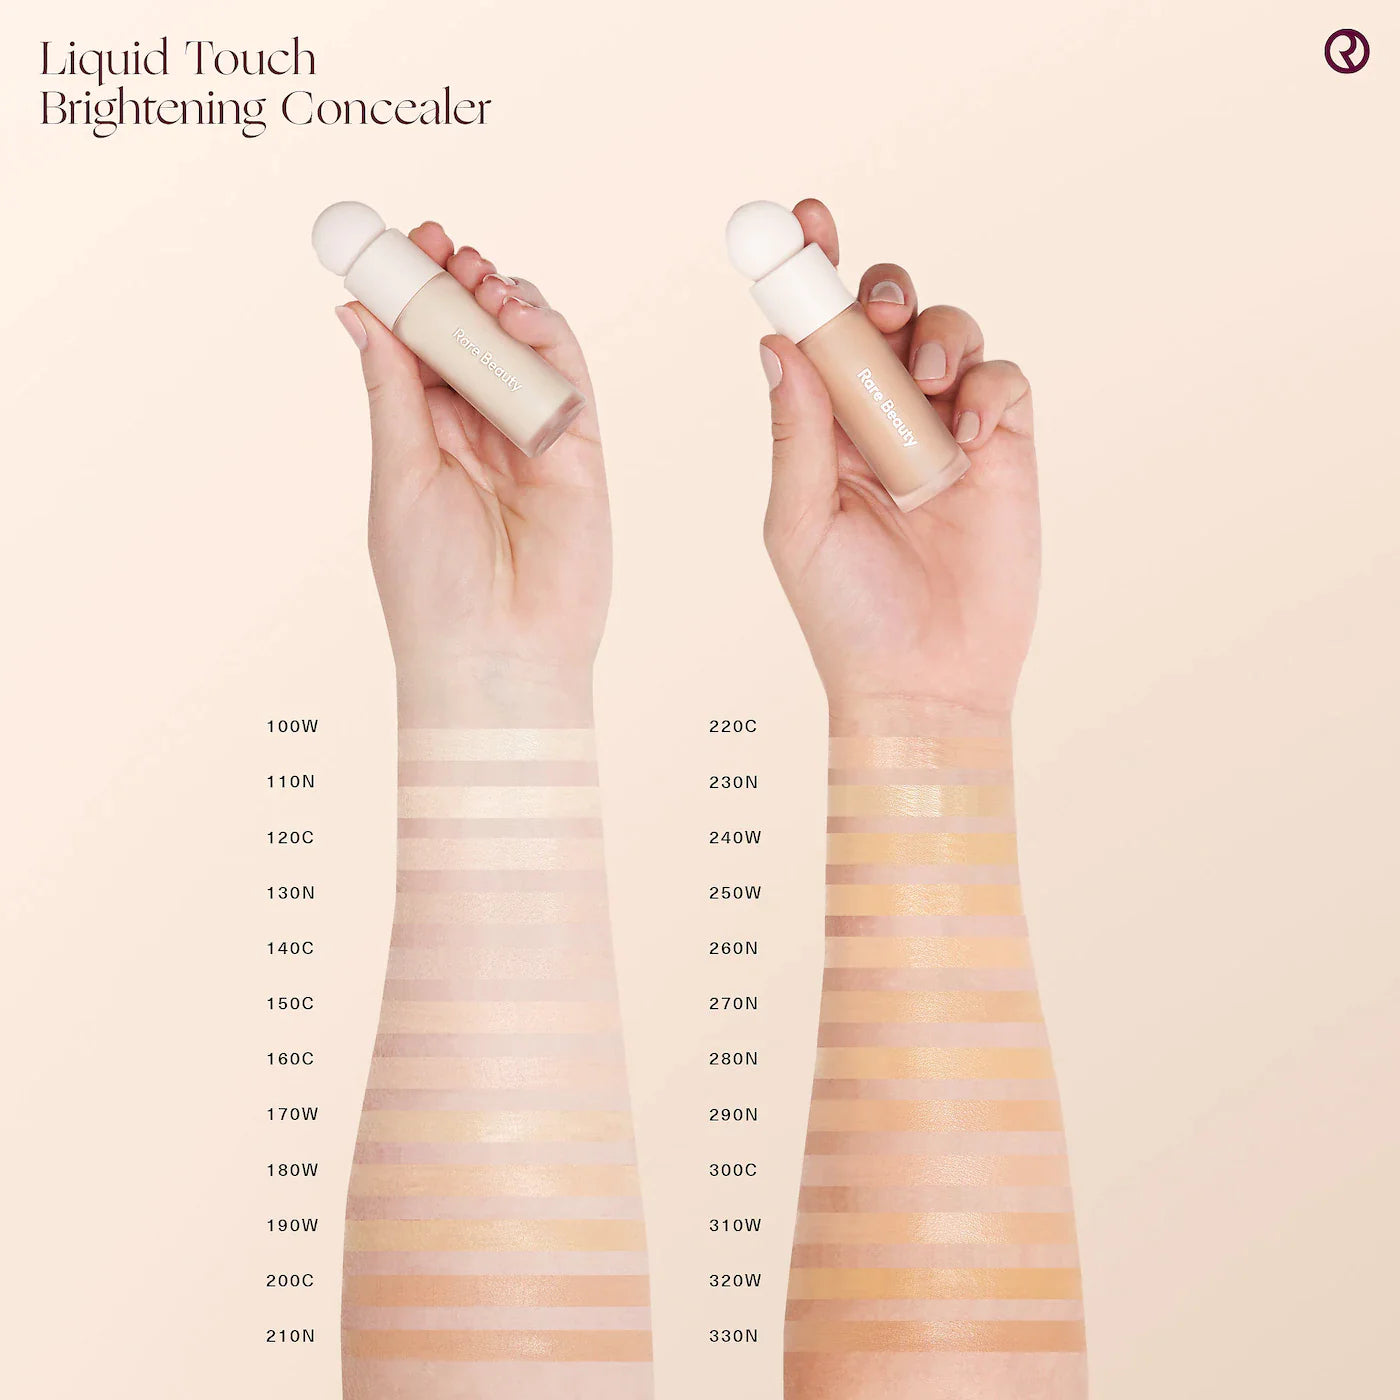 Rare Beauty Liquid Touch Brightening Concealer | 230N